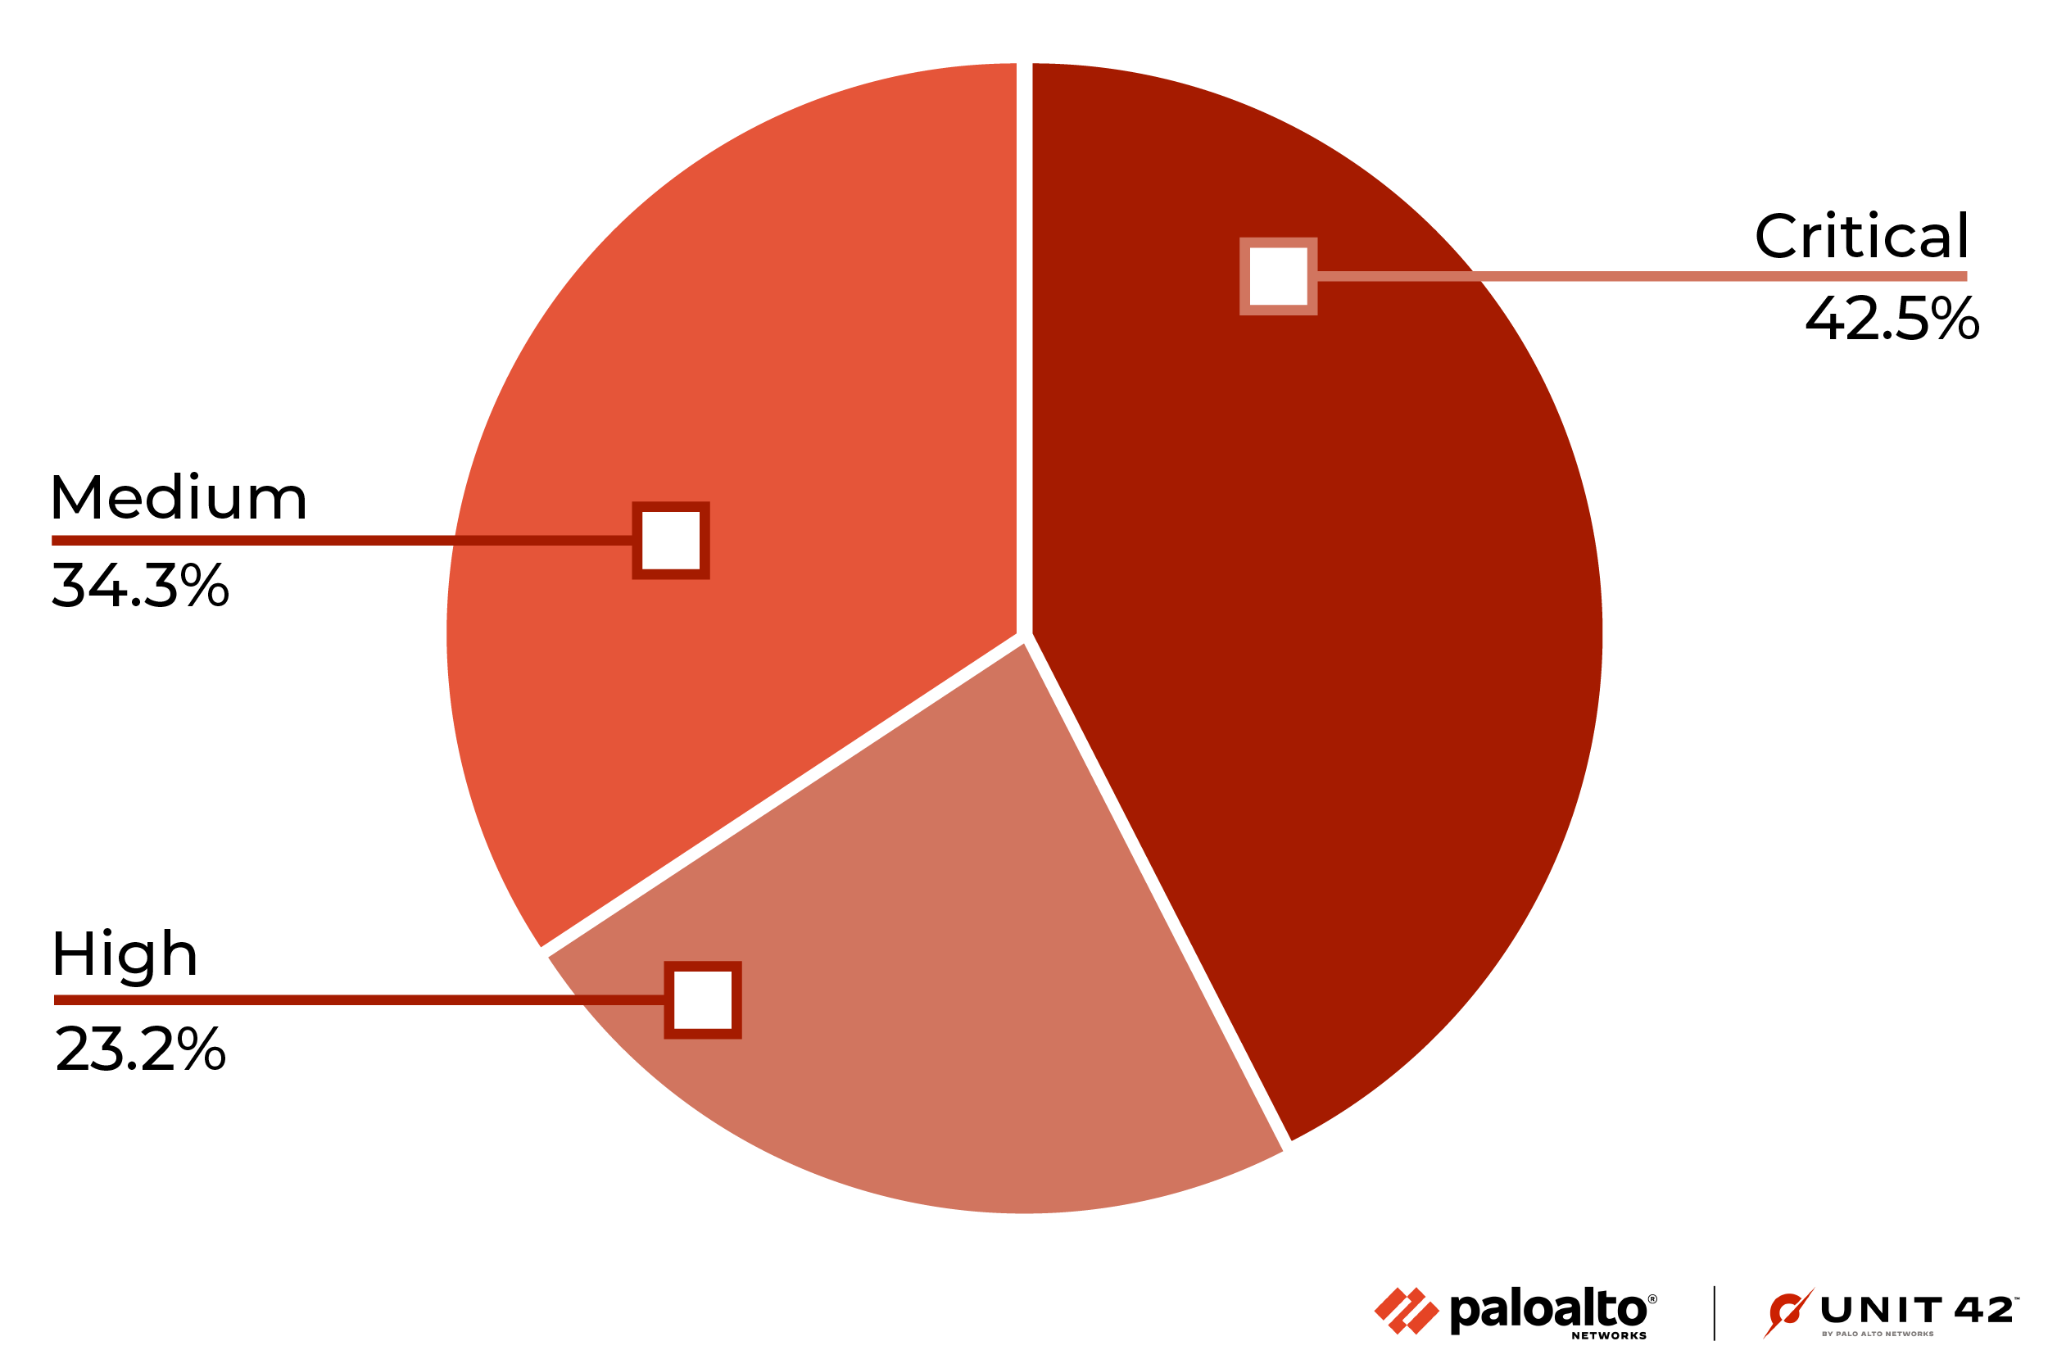 Image 4 is a pie chart measuring attack severity distribution of critical, high, and medium CVEs registered through November 2022 to January 2023. The largest percent is “Critical” at 42.5%. 